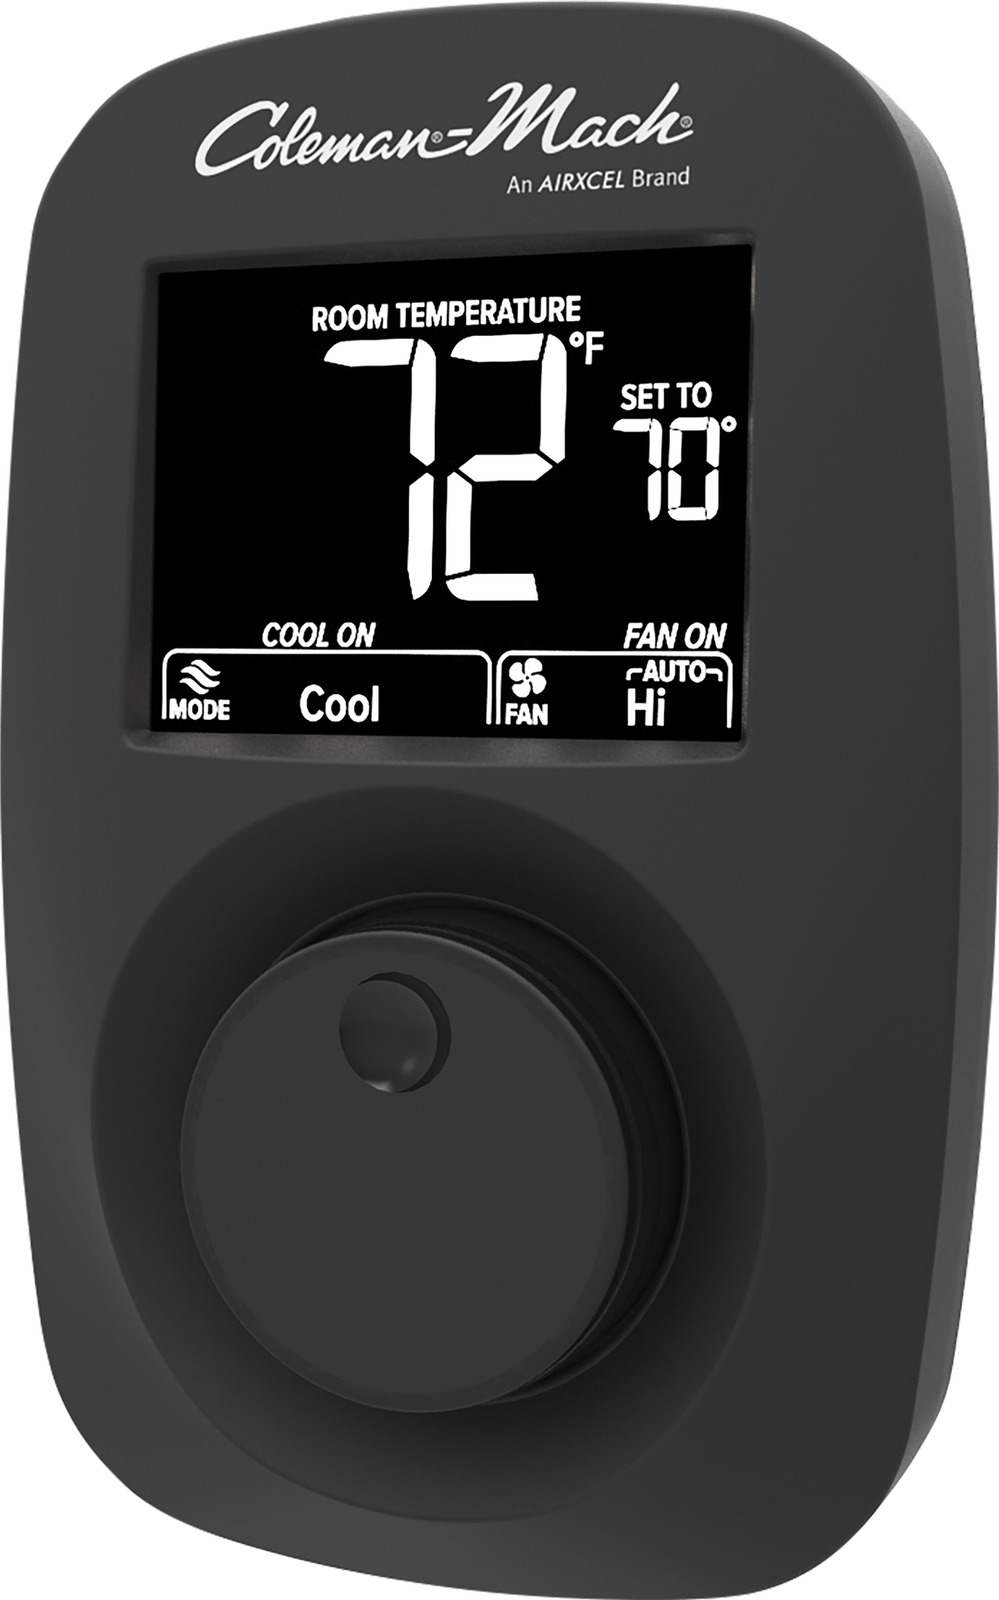 COLEMAN RVP 9420-381 Wall Thermostat Quality Design With Over 55 Years Of Experi